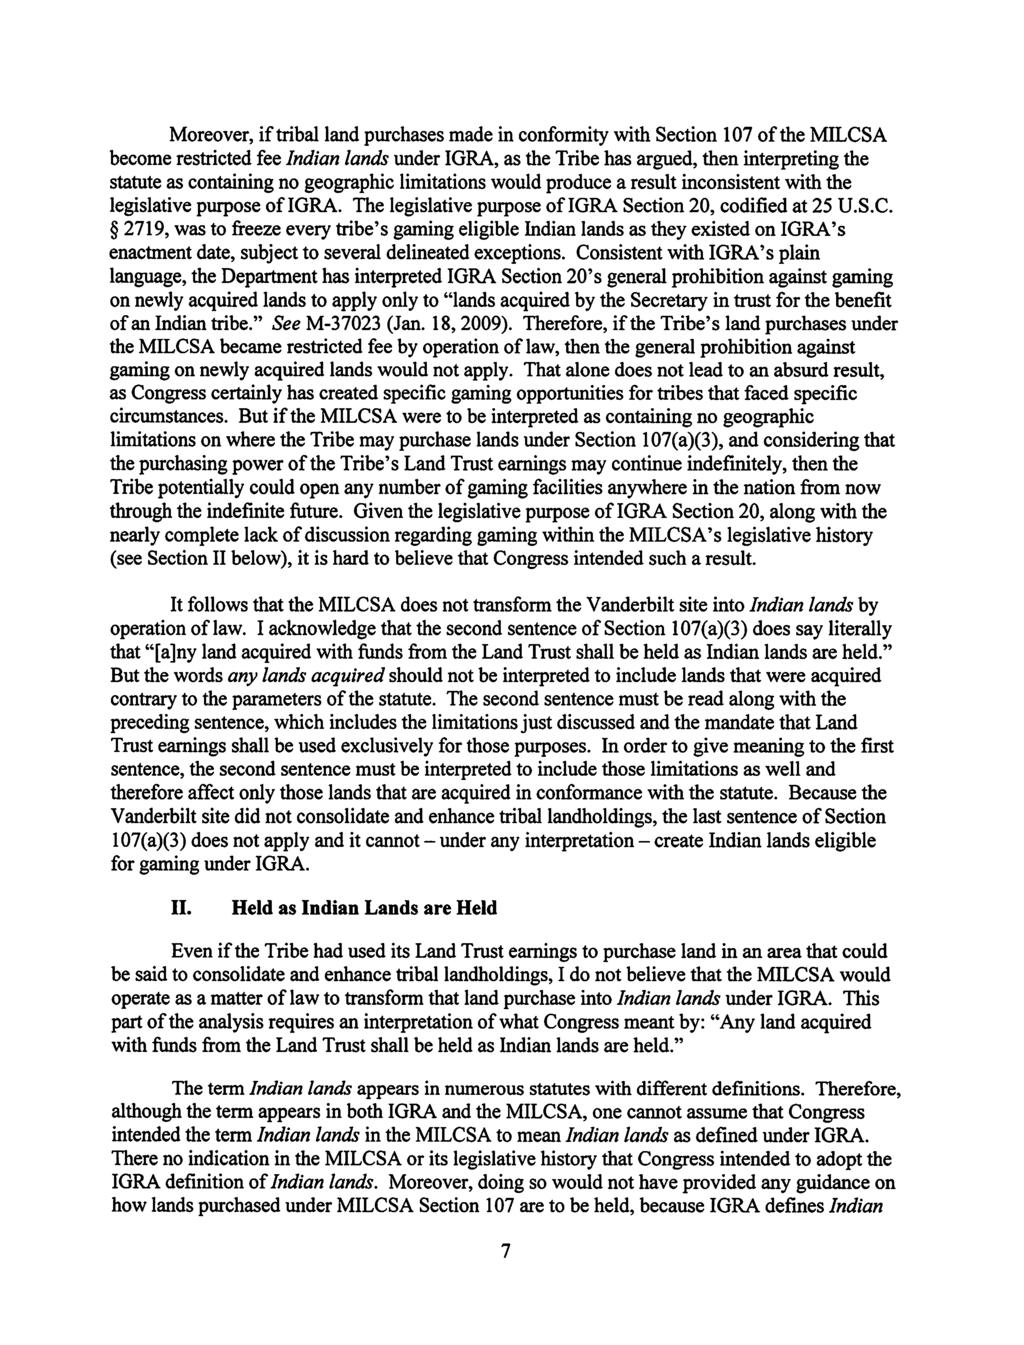 Case 1:18-cv-02035-TNM Document 1-1 Filed 08/30/18 Page 8 of 17 Moreover, if tribal land purchases made in conformity with Section 107 of the MILCSA become restricted fee Indian lands under IGRA, as